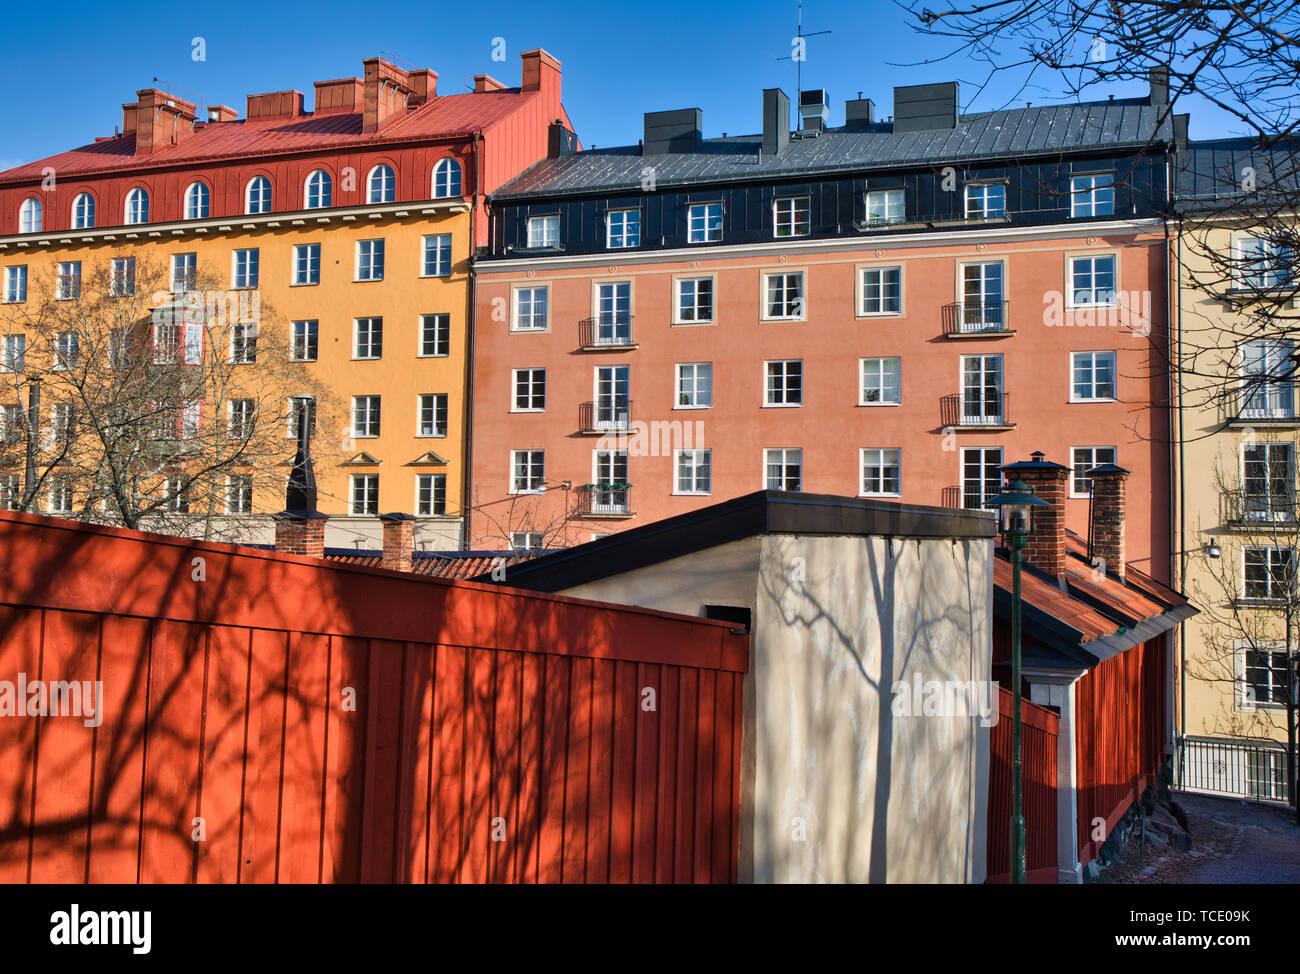 Colourful house facades and traditional falun red fence, Sodermalm, Stockholm, Sweden, Scandinavia Stock Photo